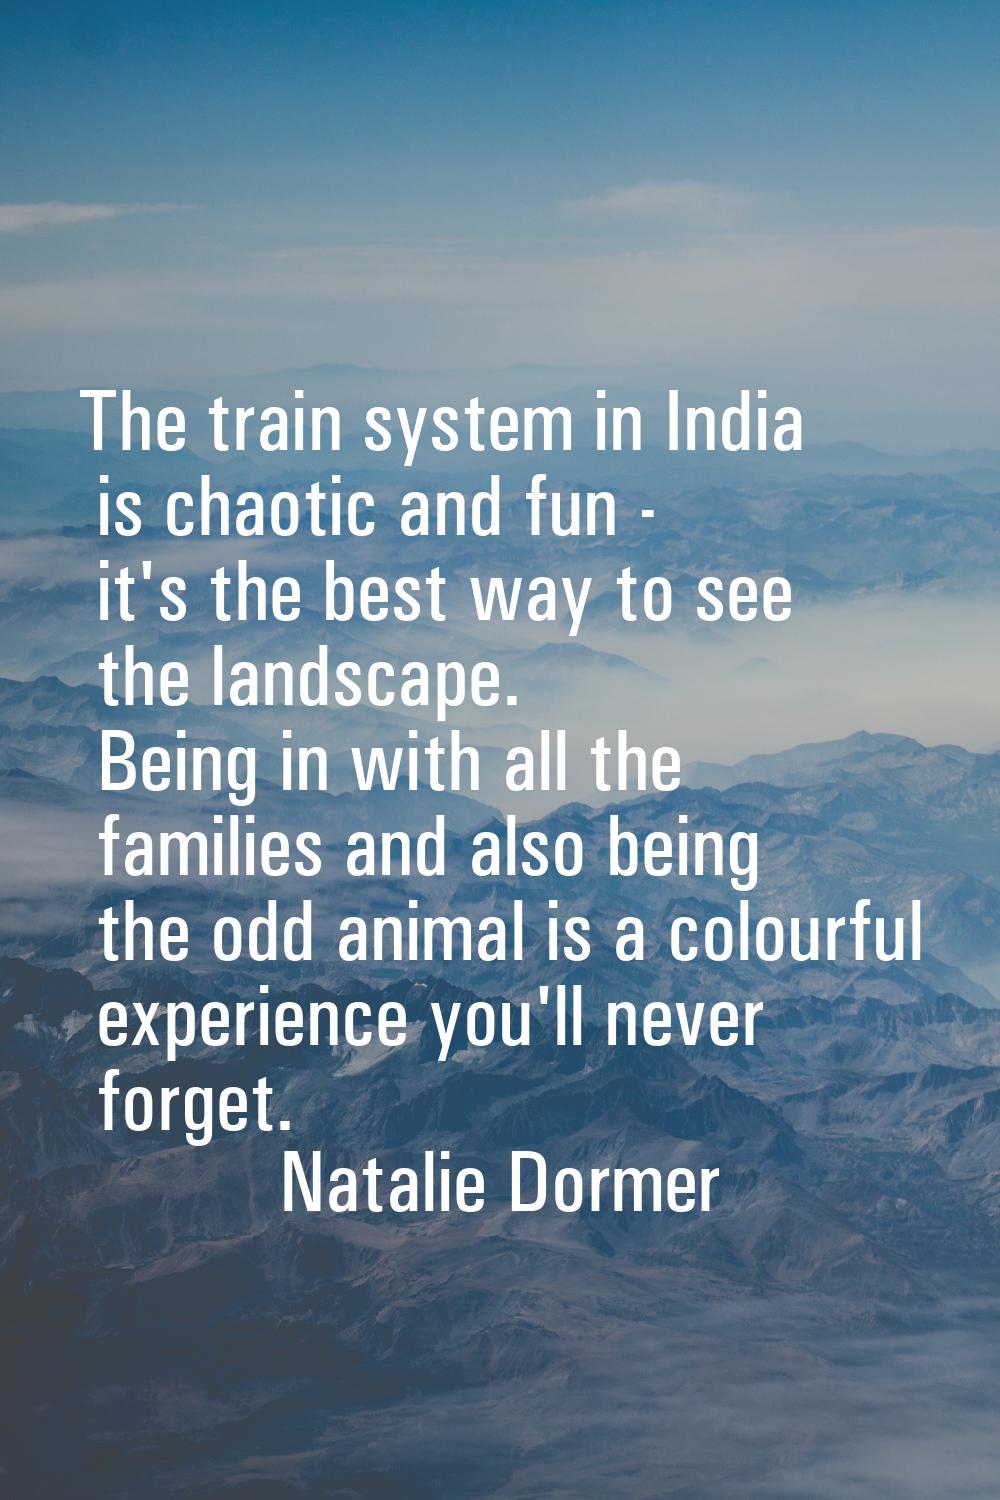 The train system in India is chaotic and fun - it's the best way to see the landscape. Being in wit